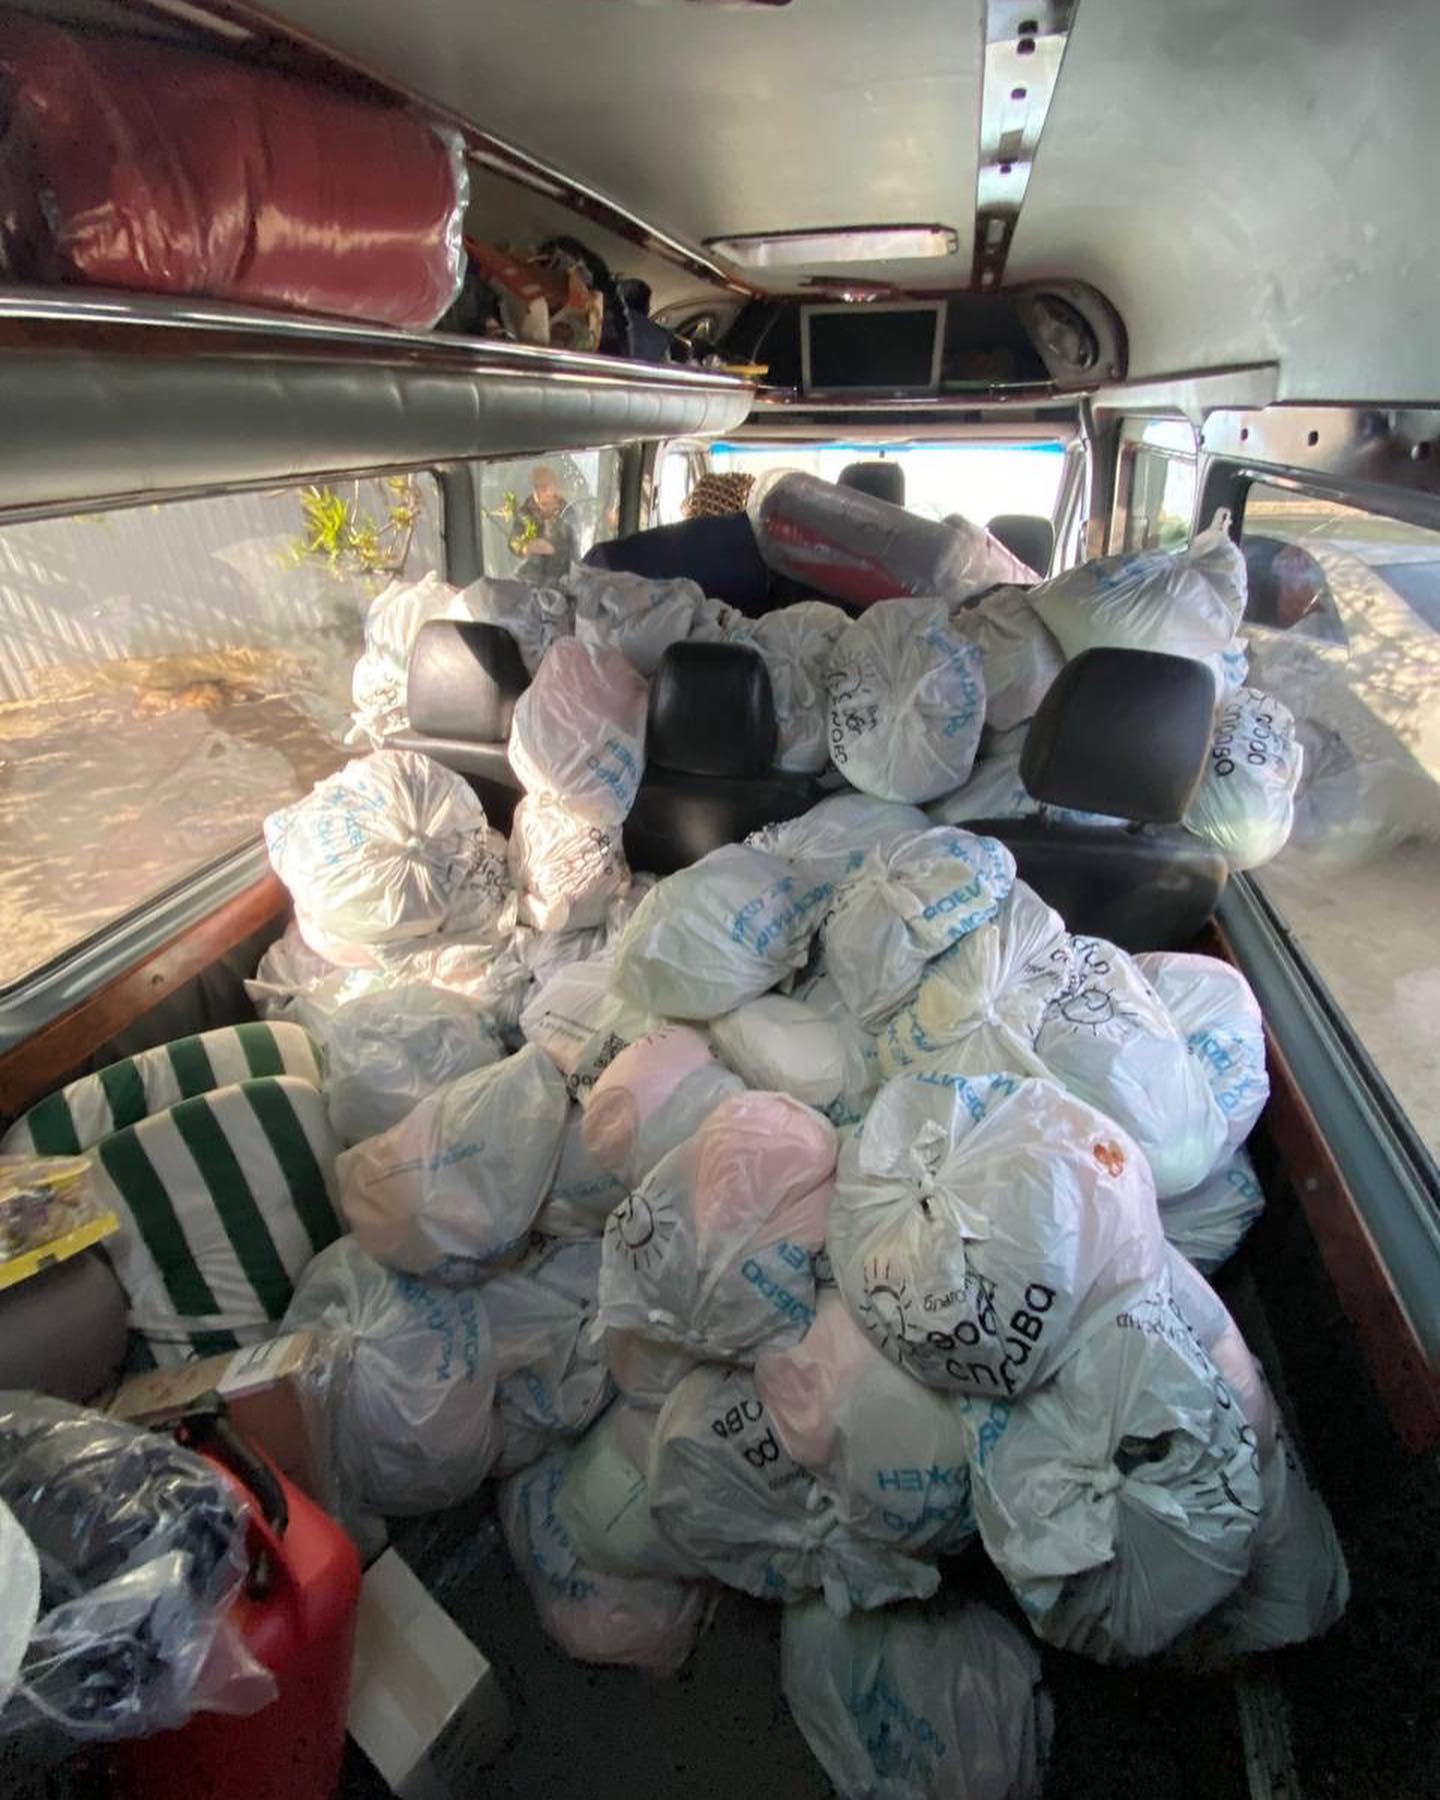 Interior of a van filled with numerous plastic bags containing humanitarian aid for Ukraine, with visible front seats and van ceiling.